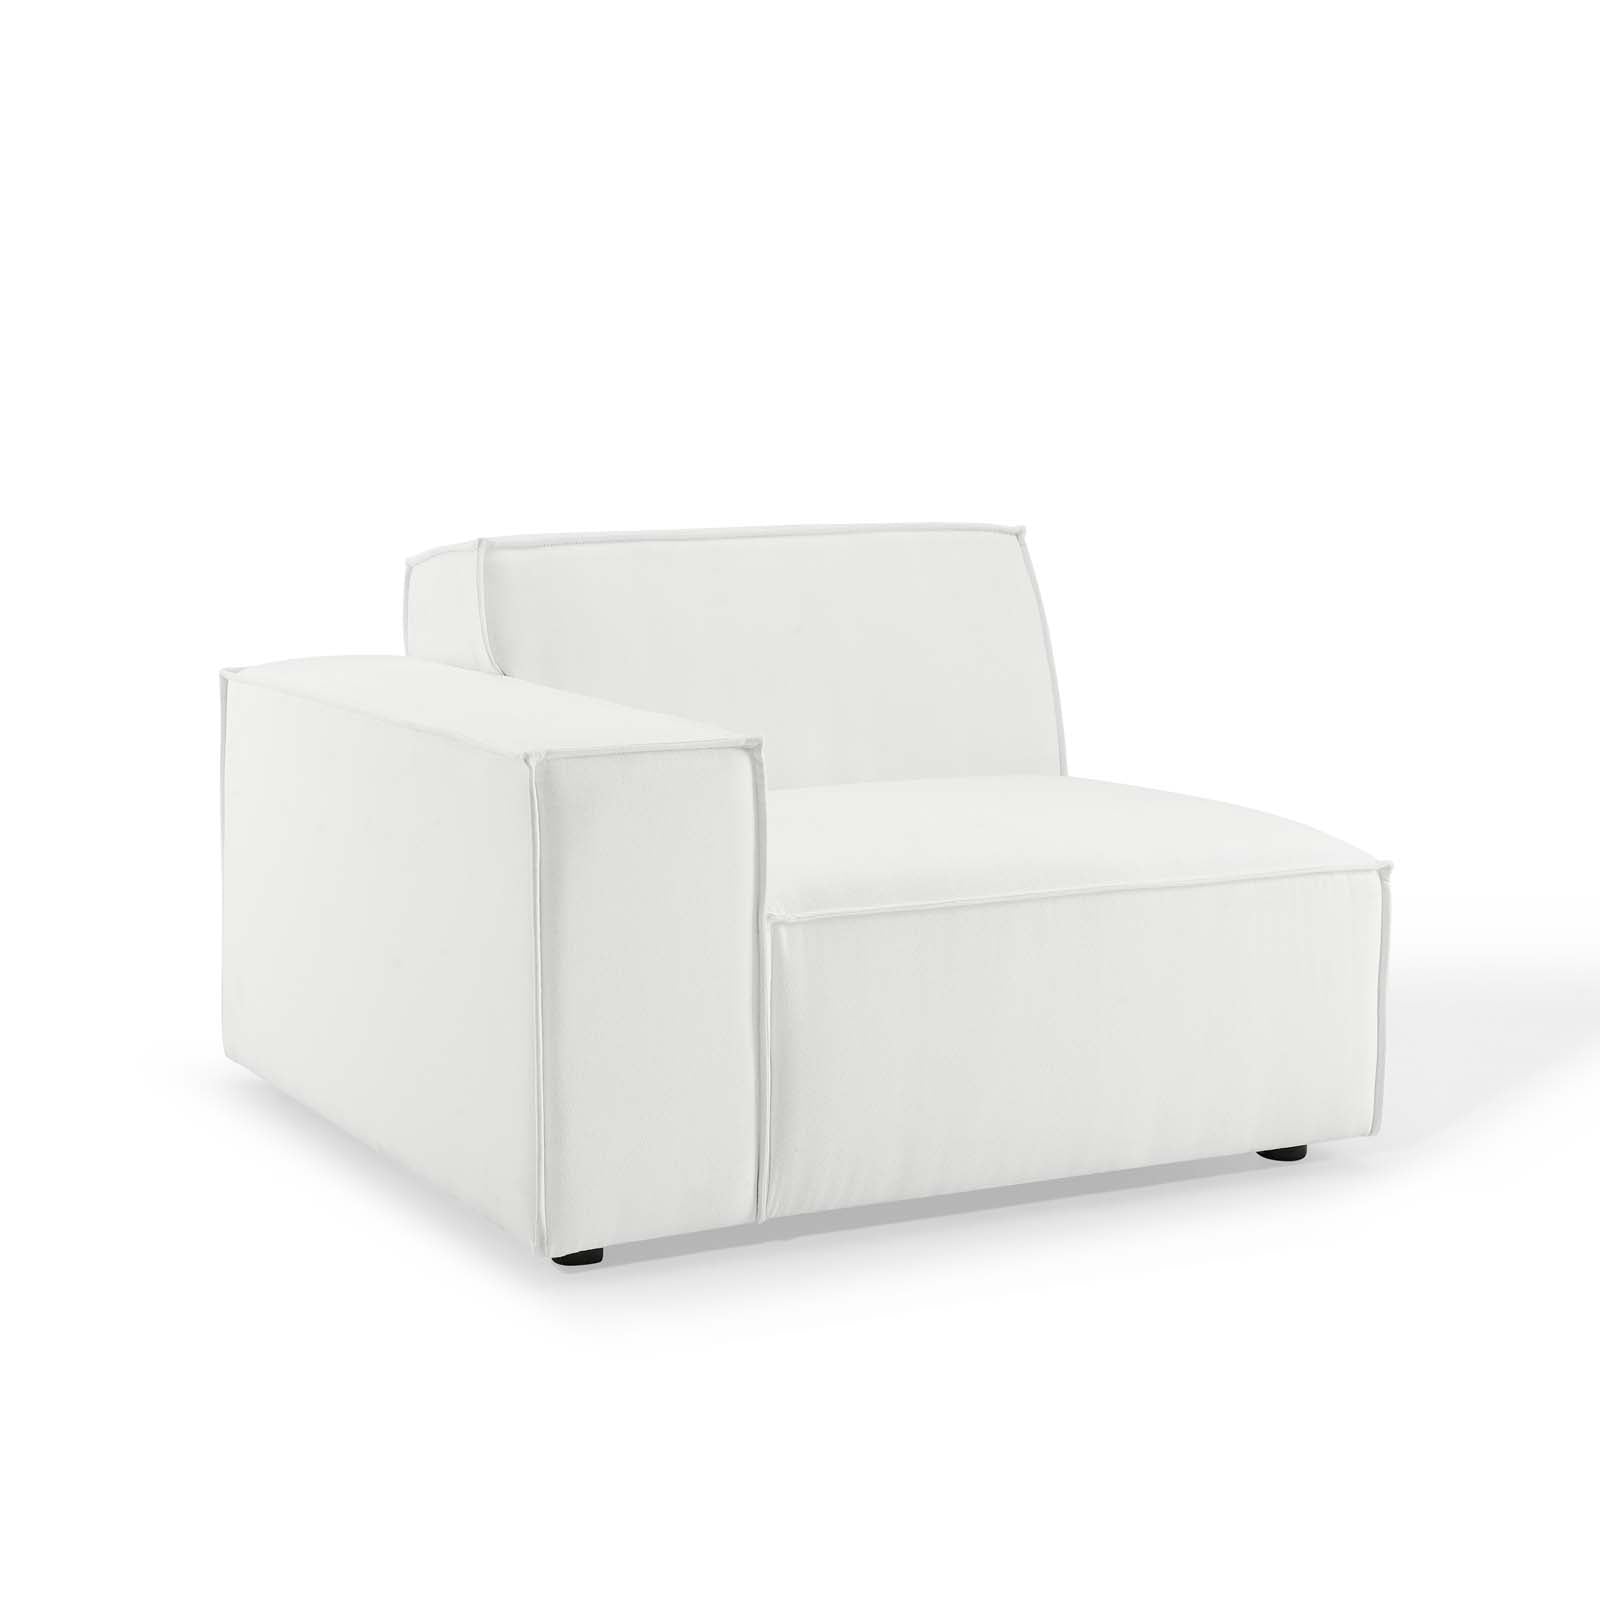 Modway Sectional Sofas - Restore 2-Piece Sectional Sofa White